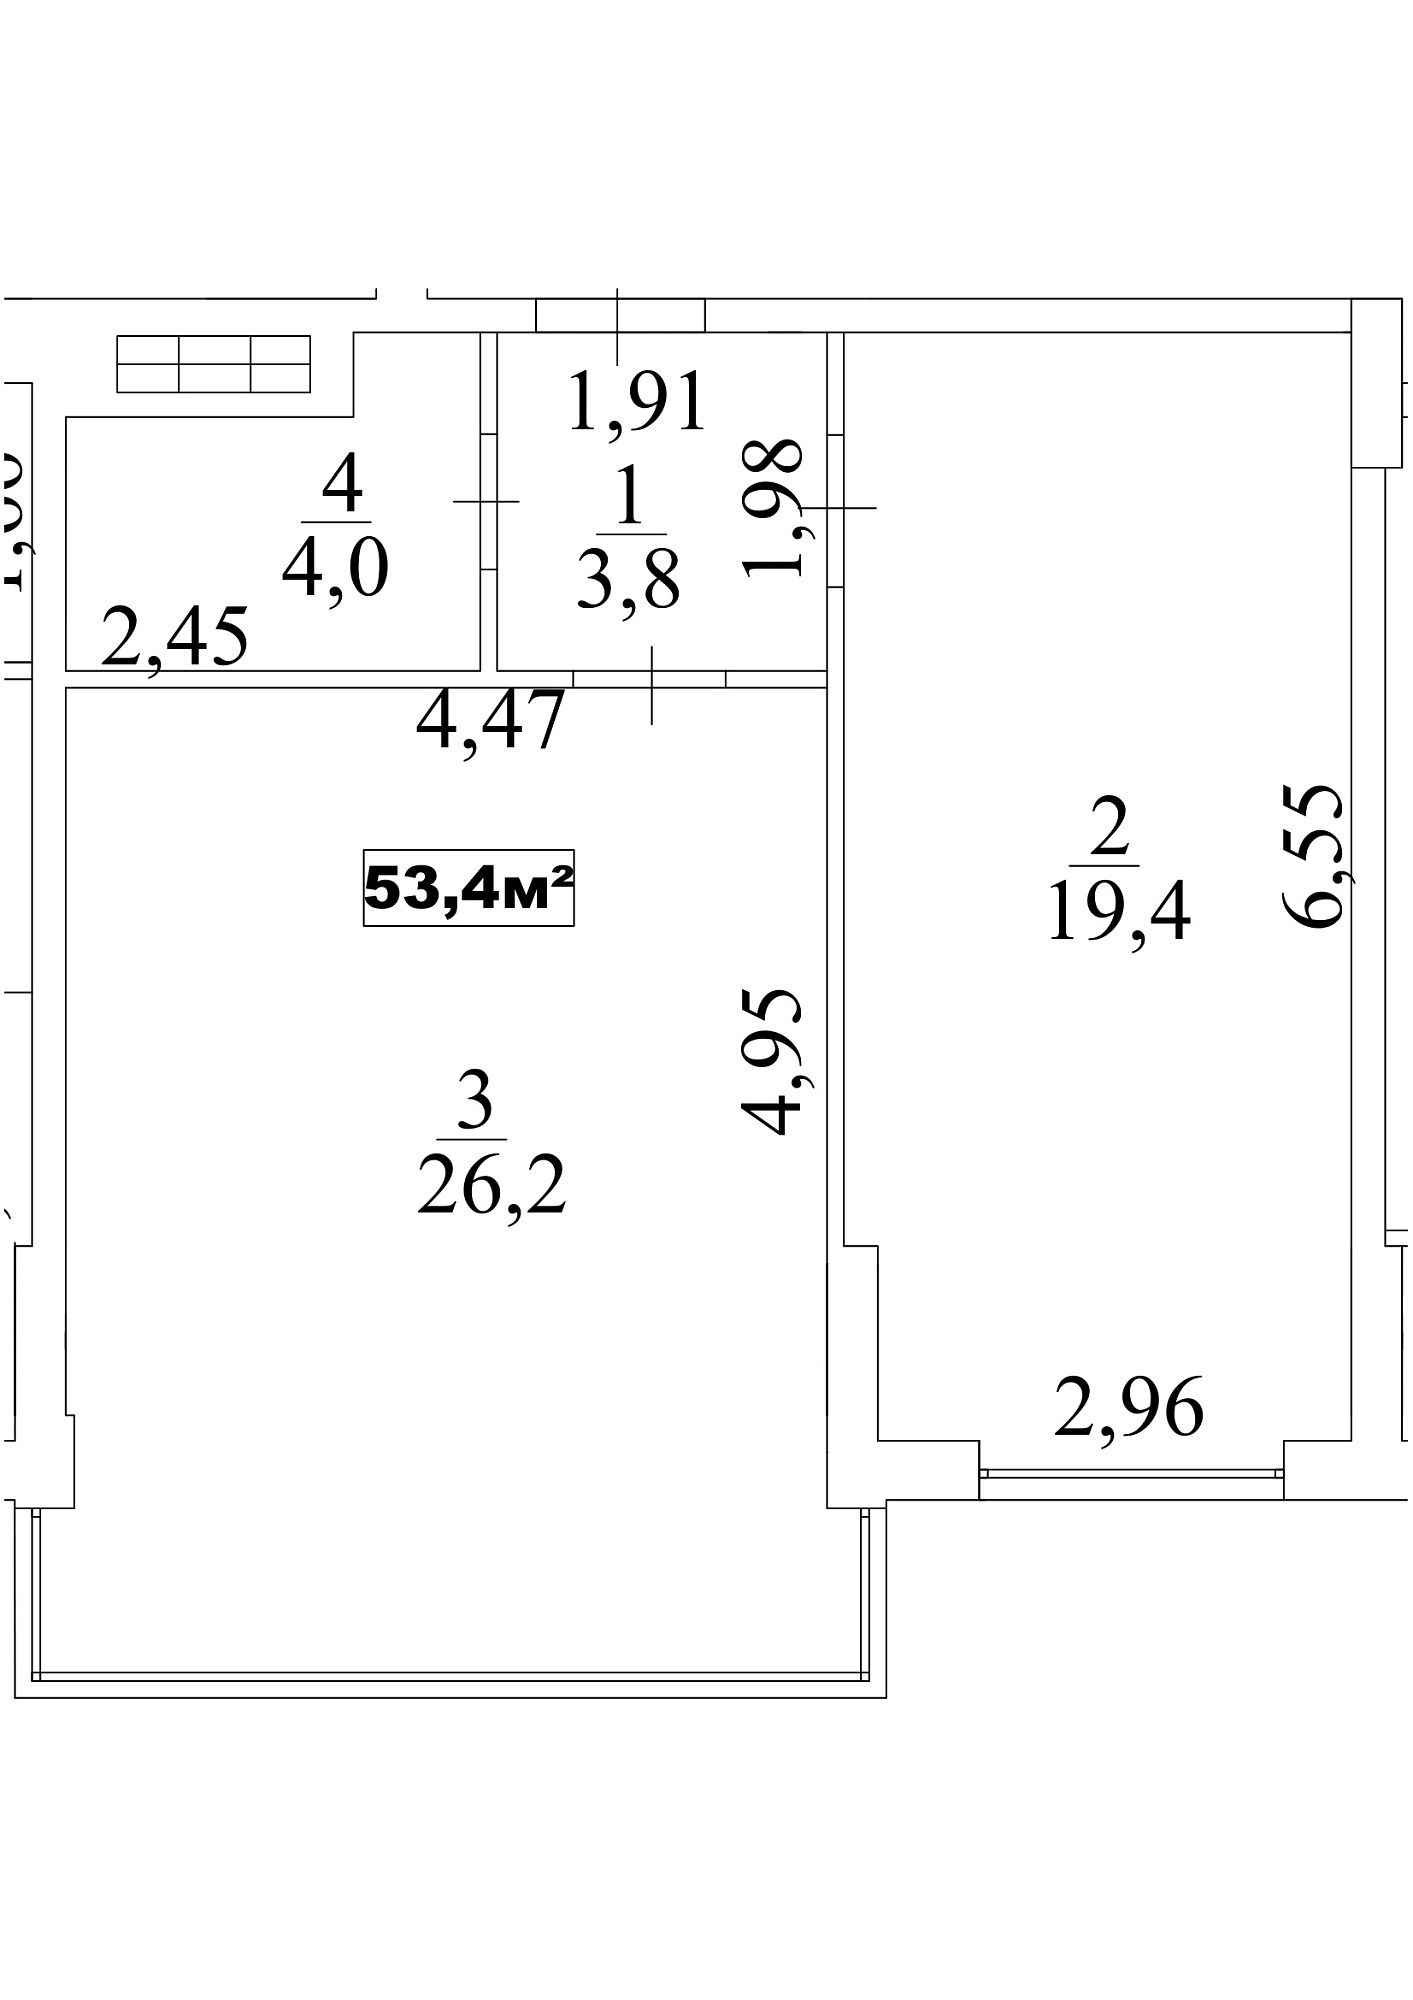 Planning 1-rm flats area 53.4m2, AB-10-05/00044.